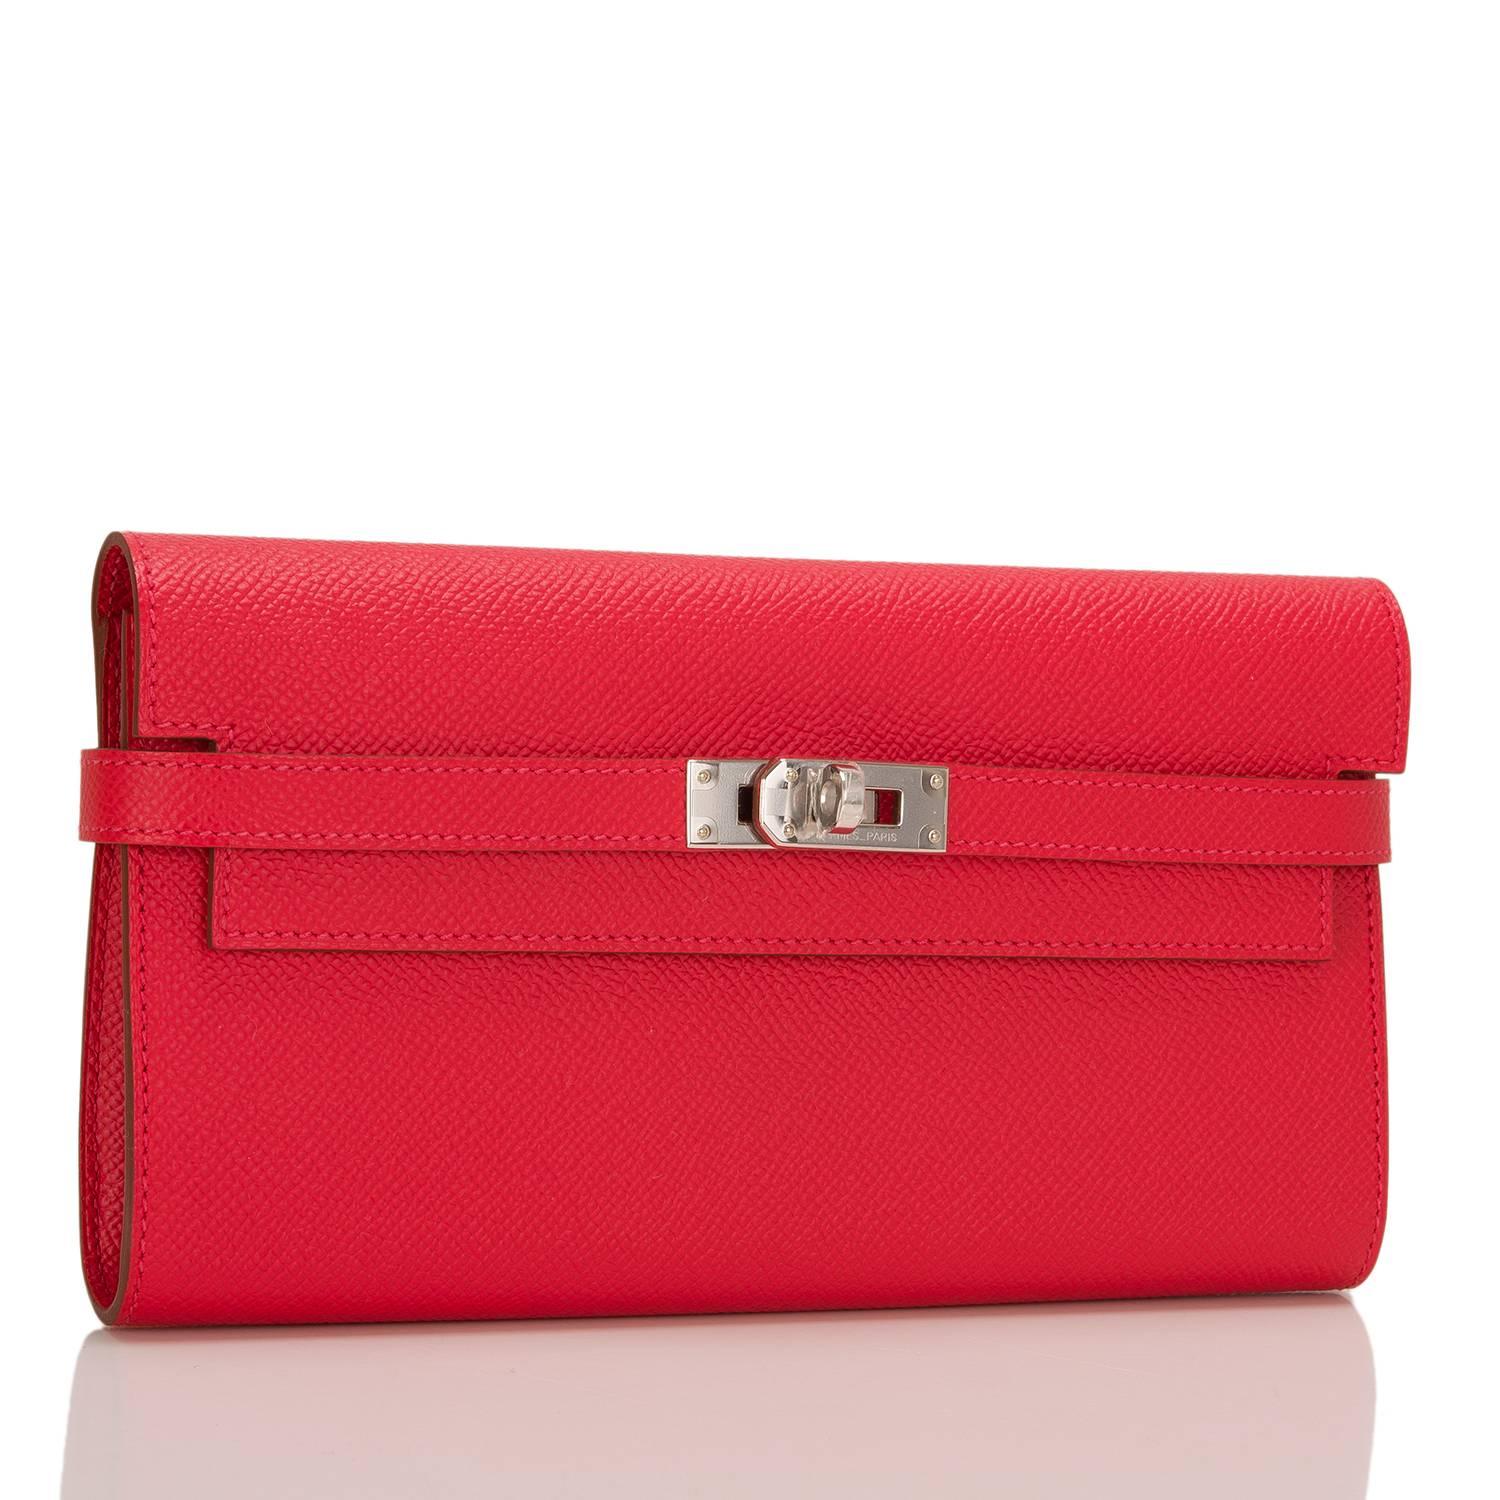 Hermes Rouge Pivoine Epsom leather Kelly Longue (Long) Wallet with palladium hardware.

This style features tonal stitching, palladium hardware, front toggle closure and gusseted sides.

The interior is lined in Rouge Pivoine chevre leather and